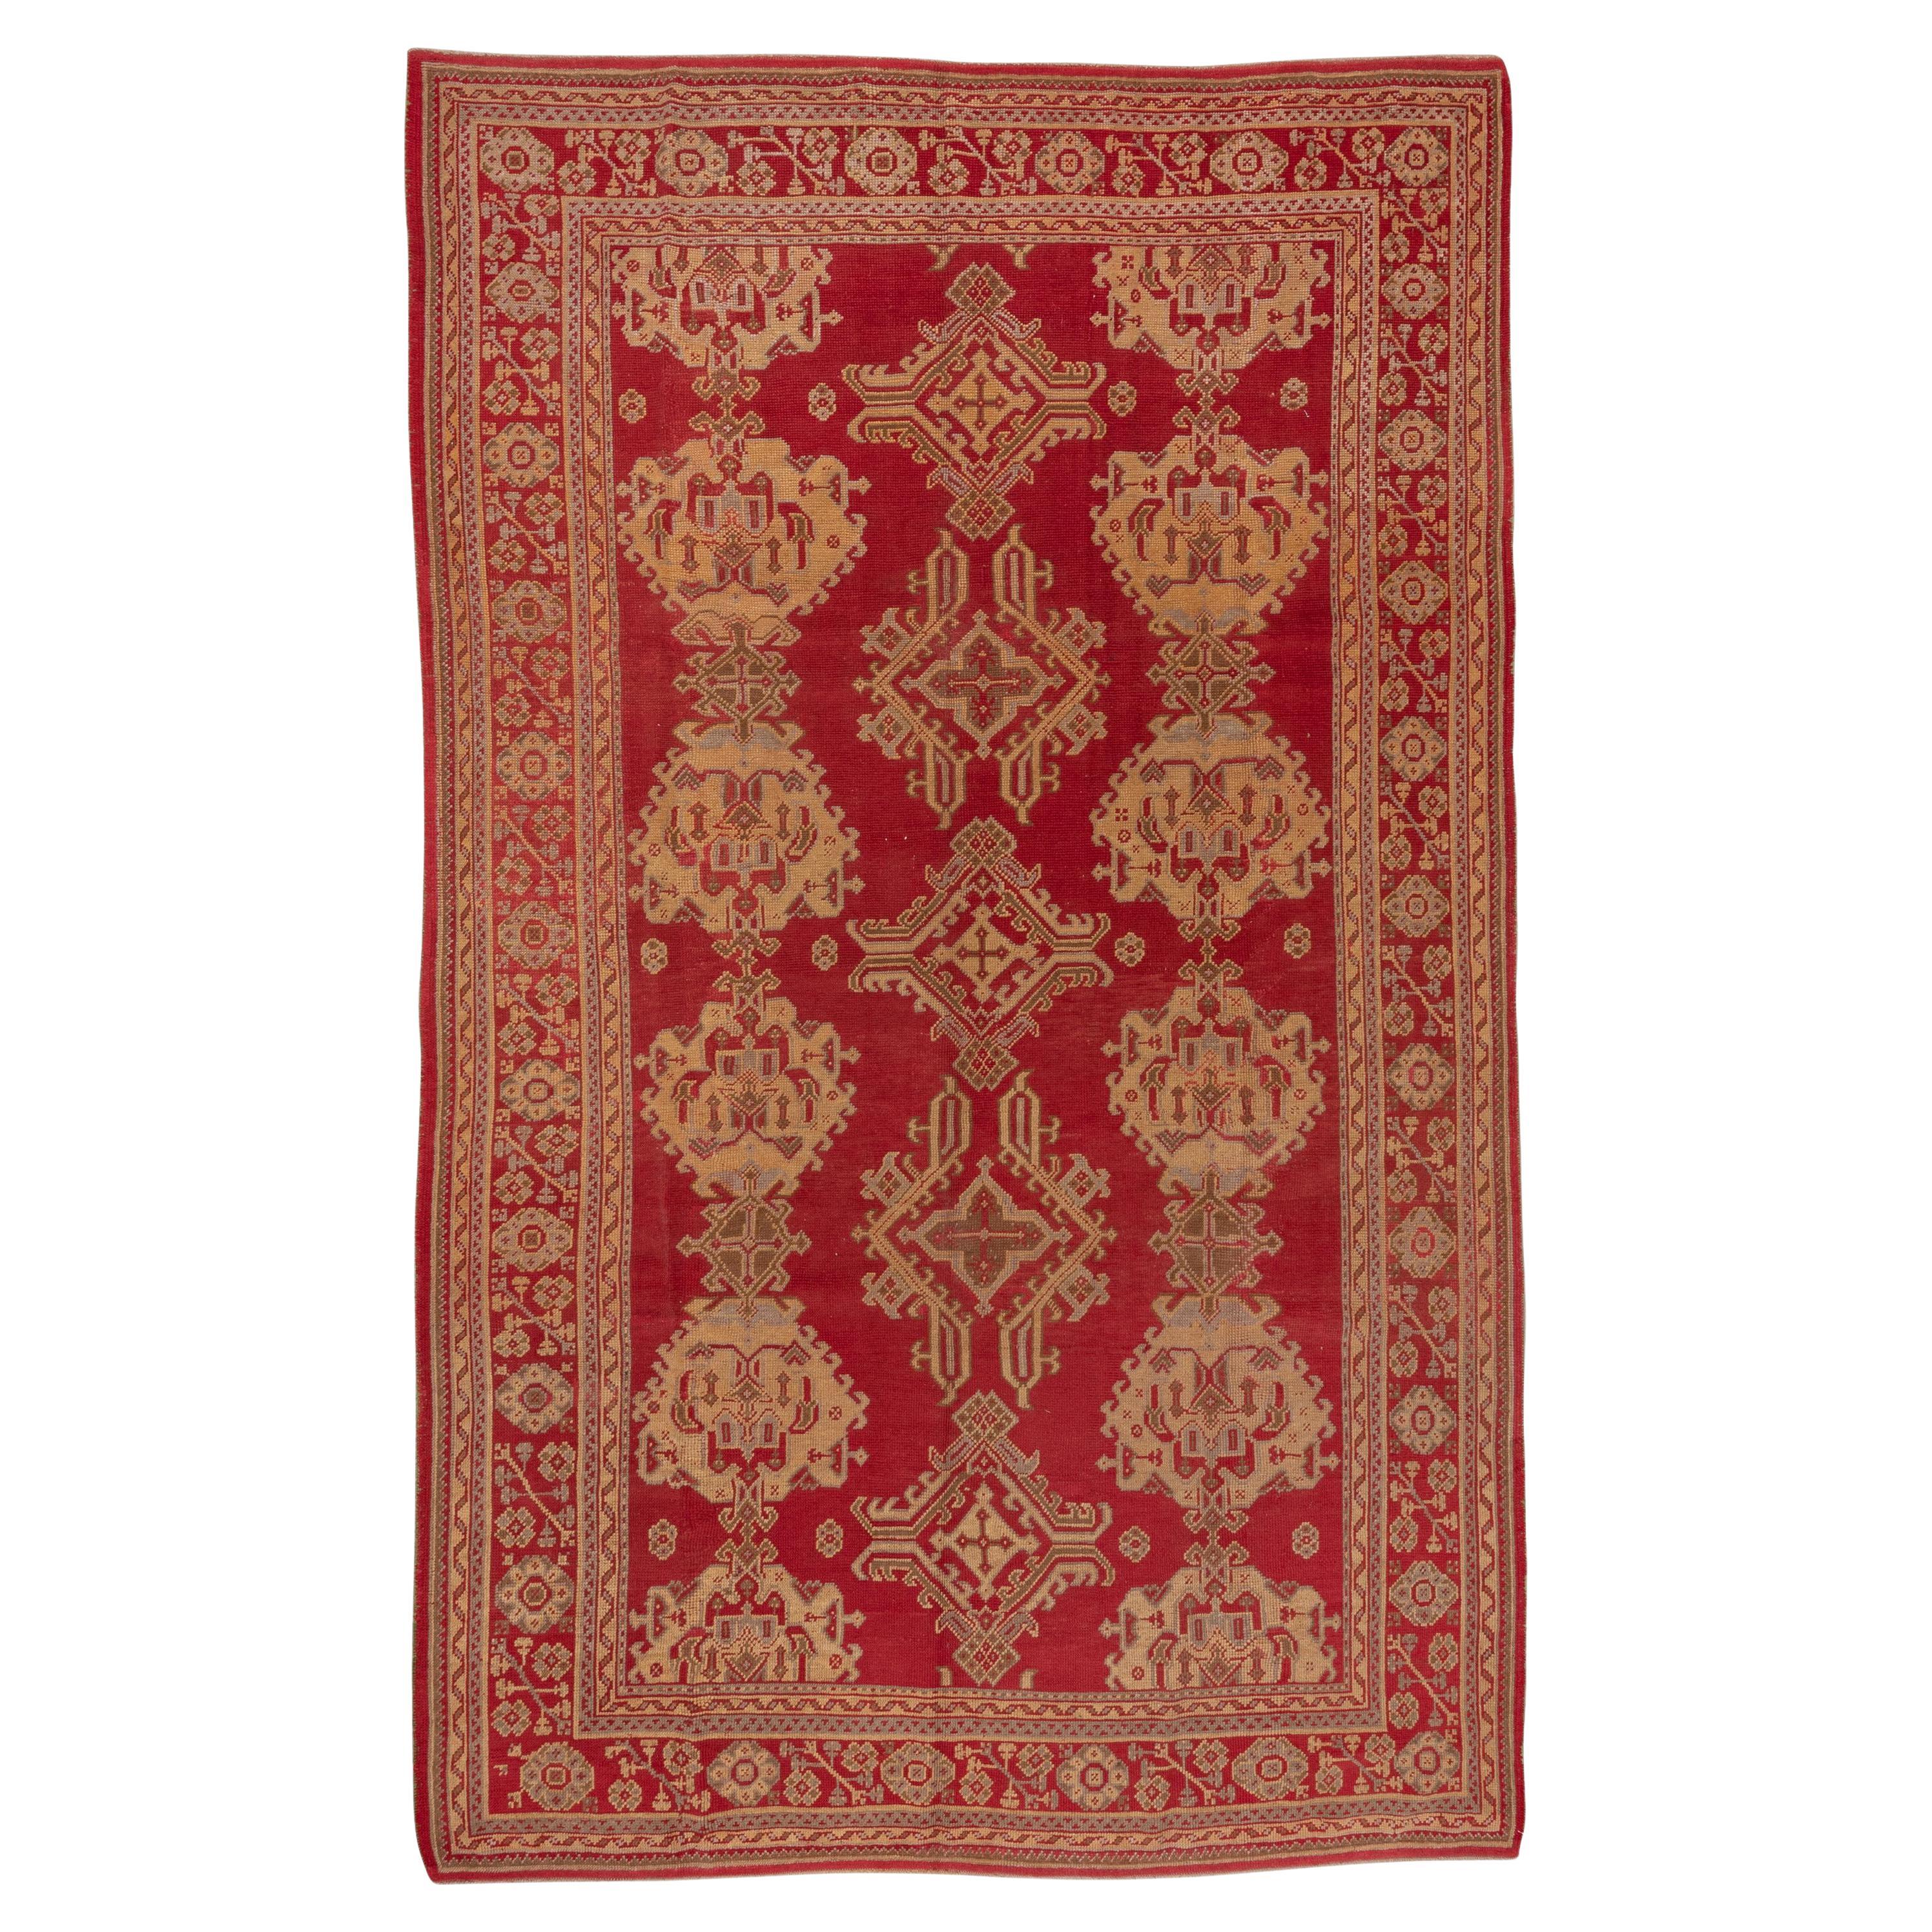 Red & Gold Antique Turkish Oushak Rug with an Allover Field, circa 1920s